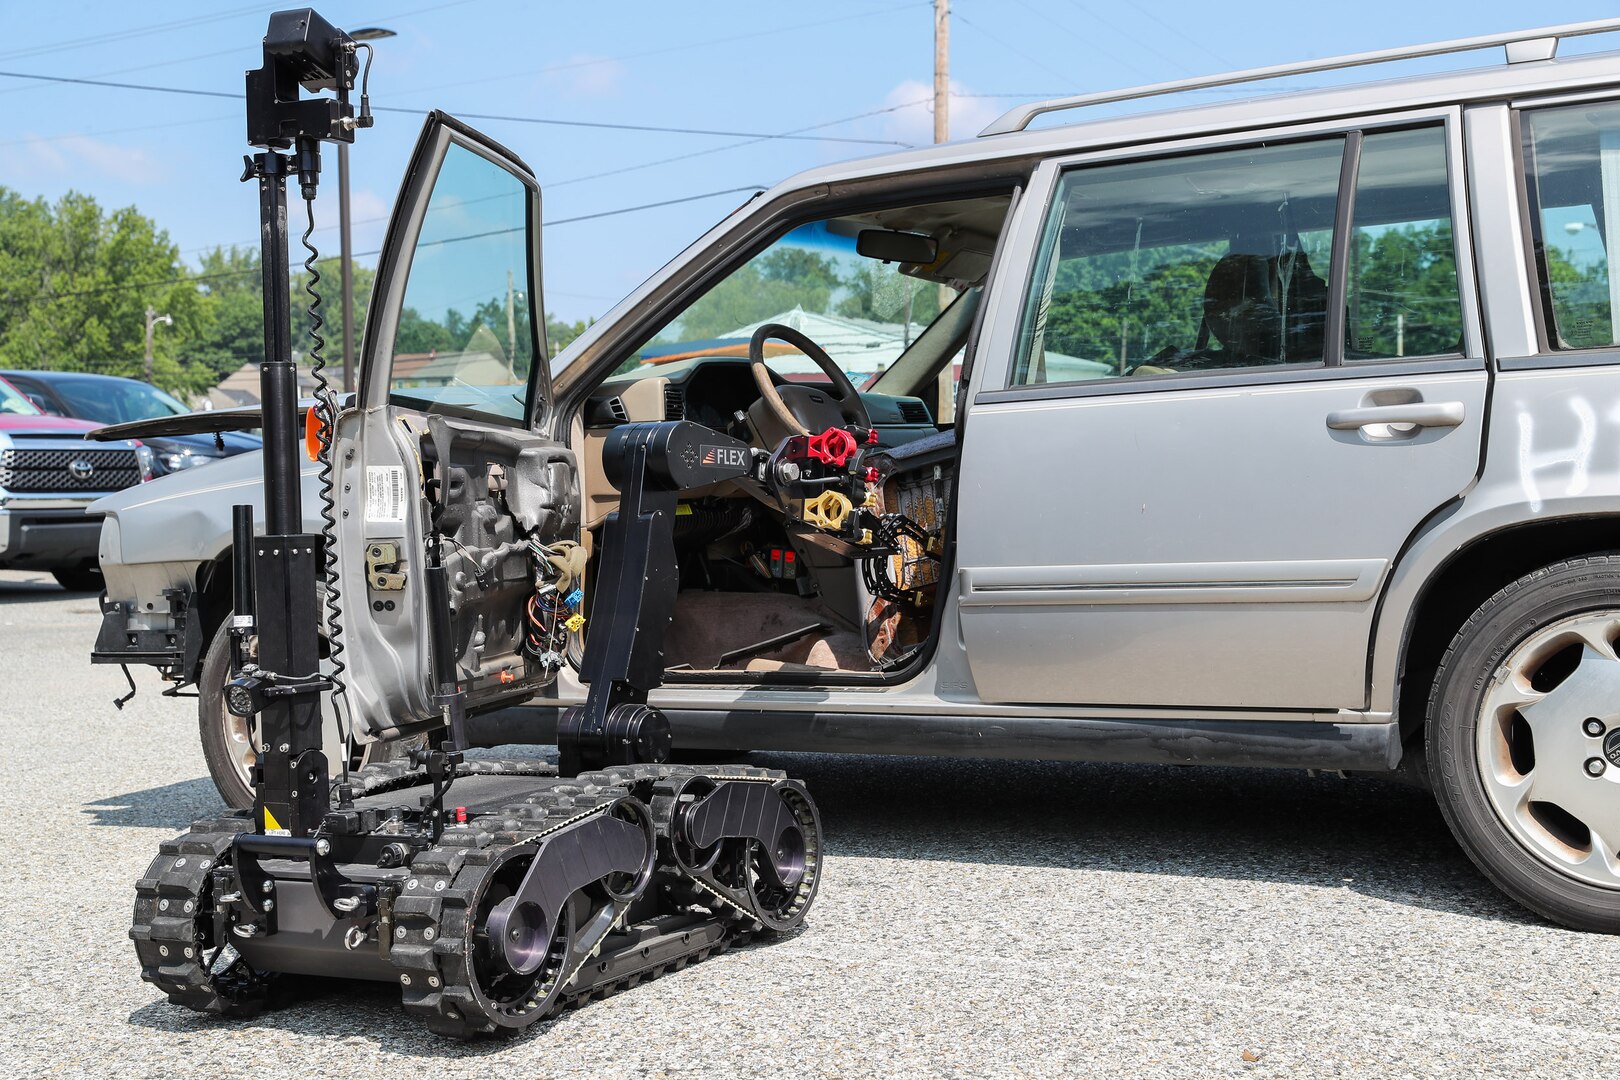 Operators at the 2021 Eastern National Robot Rodeo held in Indian Head, Maryland, use a robot to search an abandoned car after opening the car door with the robot’s arm, Aug. 2.